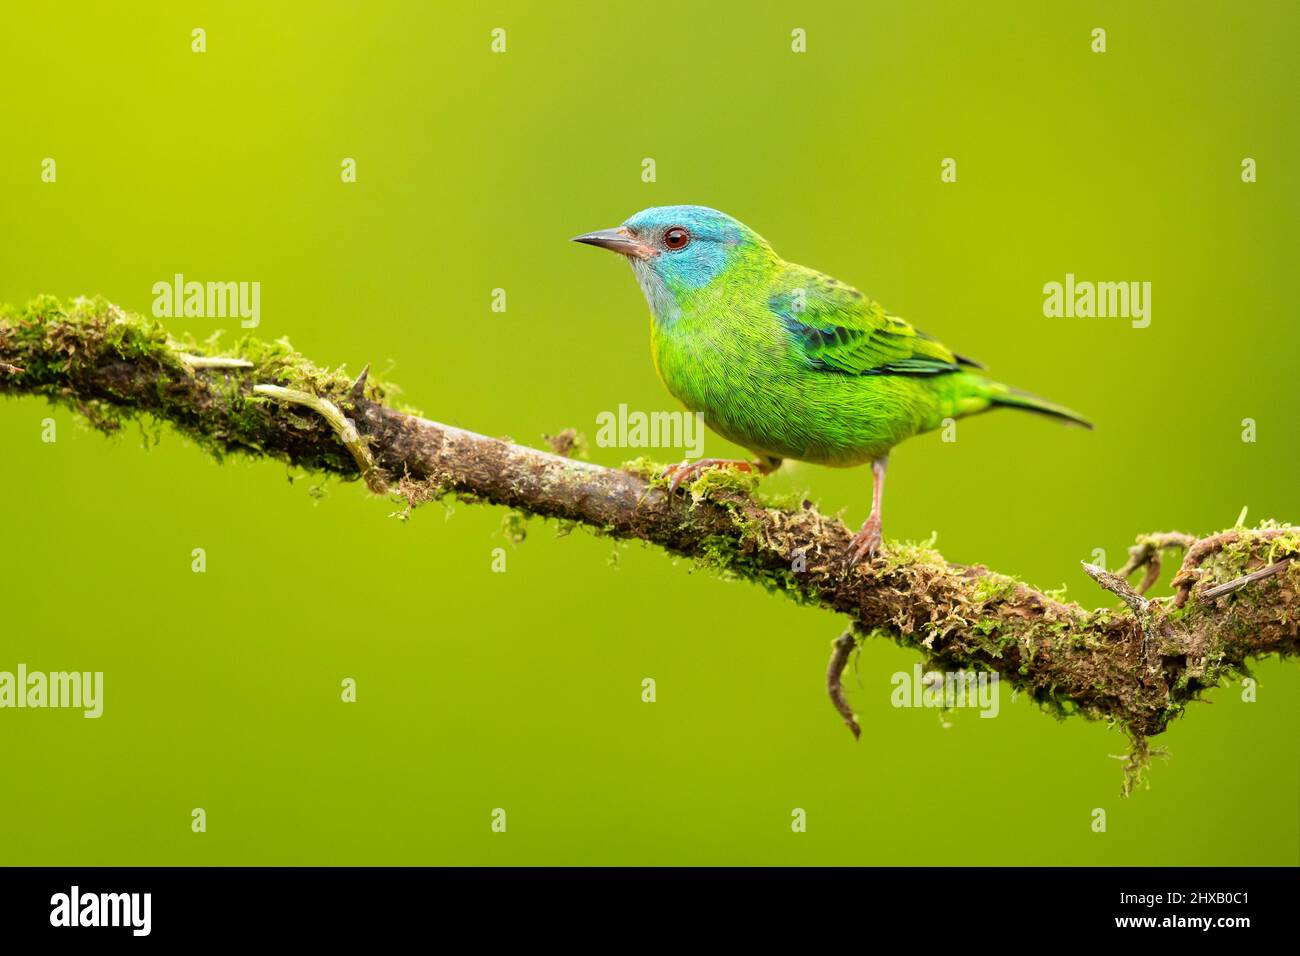 The blue dacnis or turquoise honeycreeper (Dacnis cayana) is a small passerine bird. Stock Photo